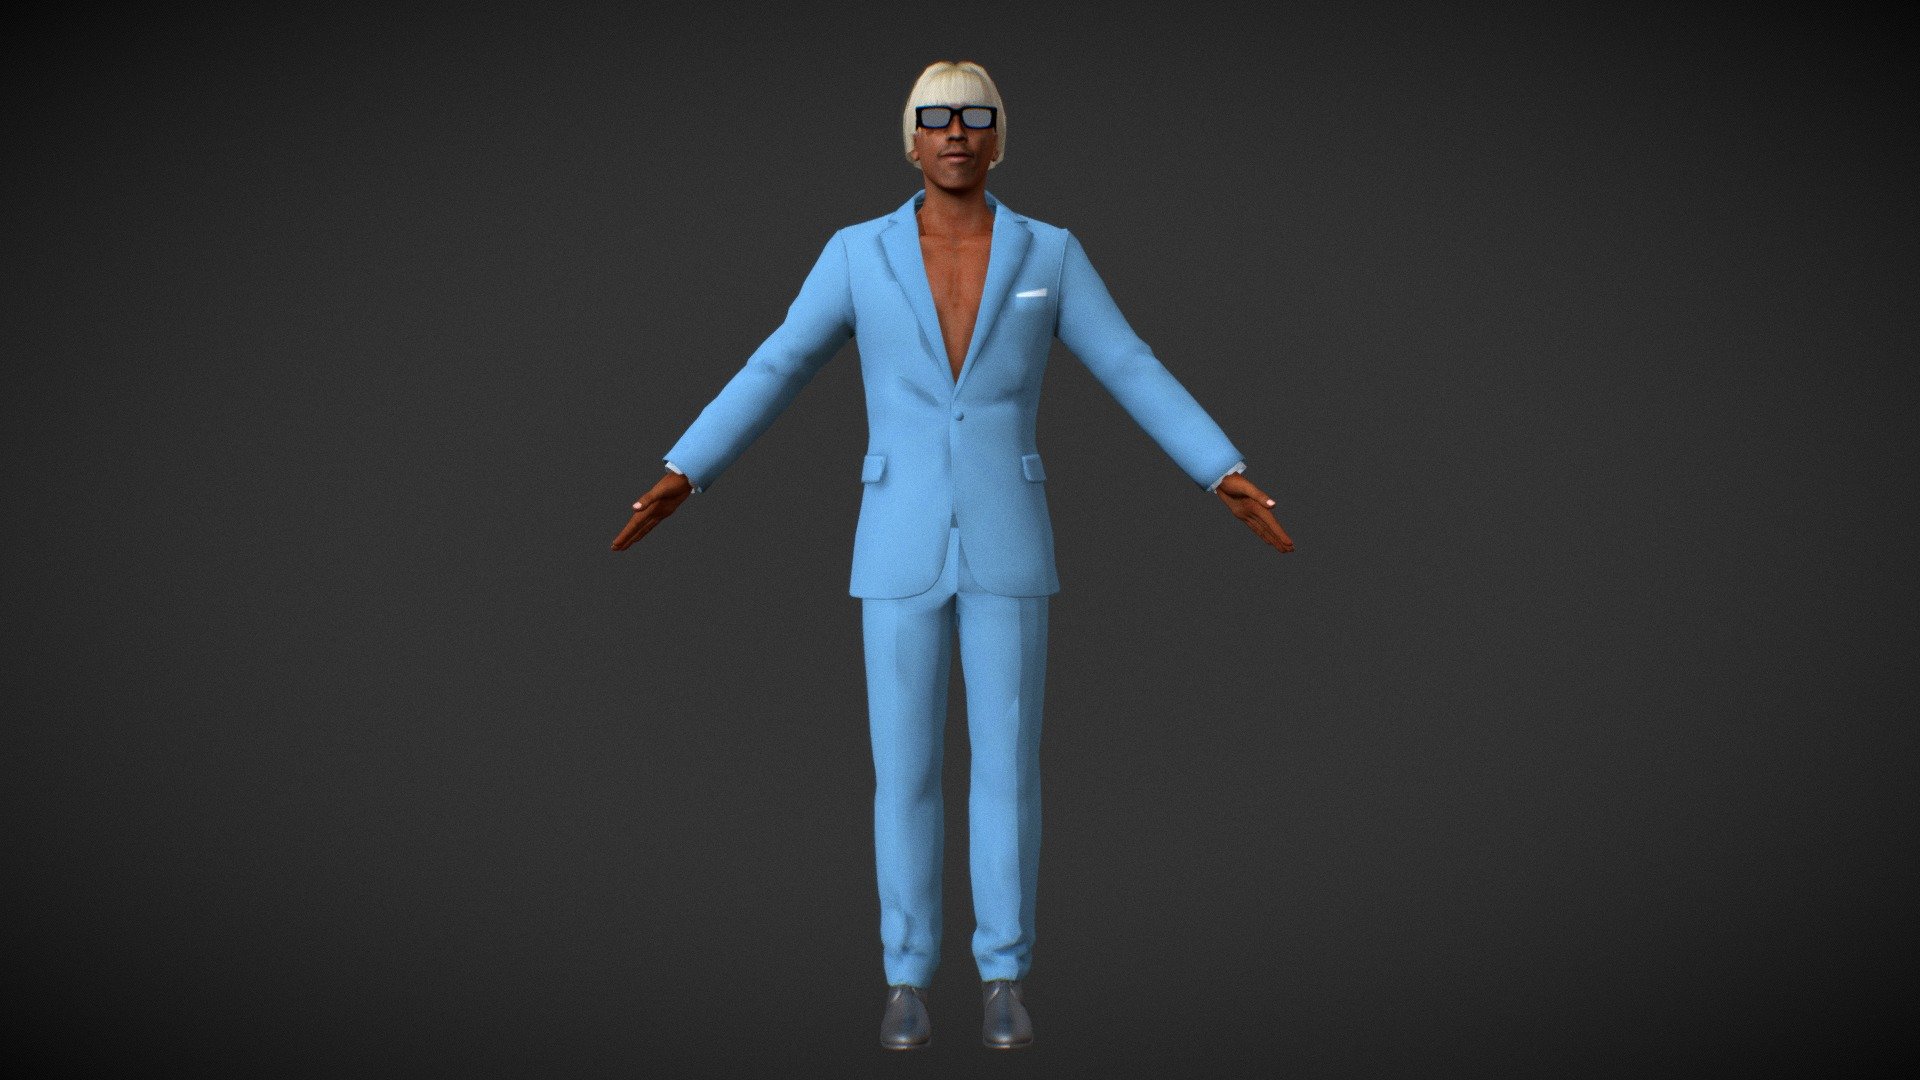 Creation of a 3D Model of Tyler The Creator in IGOR's character for my mobile game BEEF - Tyler The Creator - IGOR - 3D model by ValOne 3d model